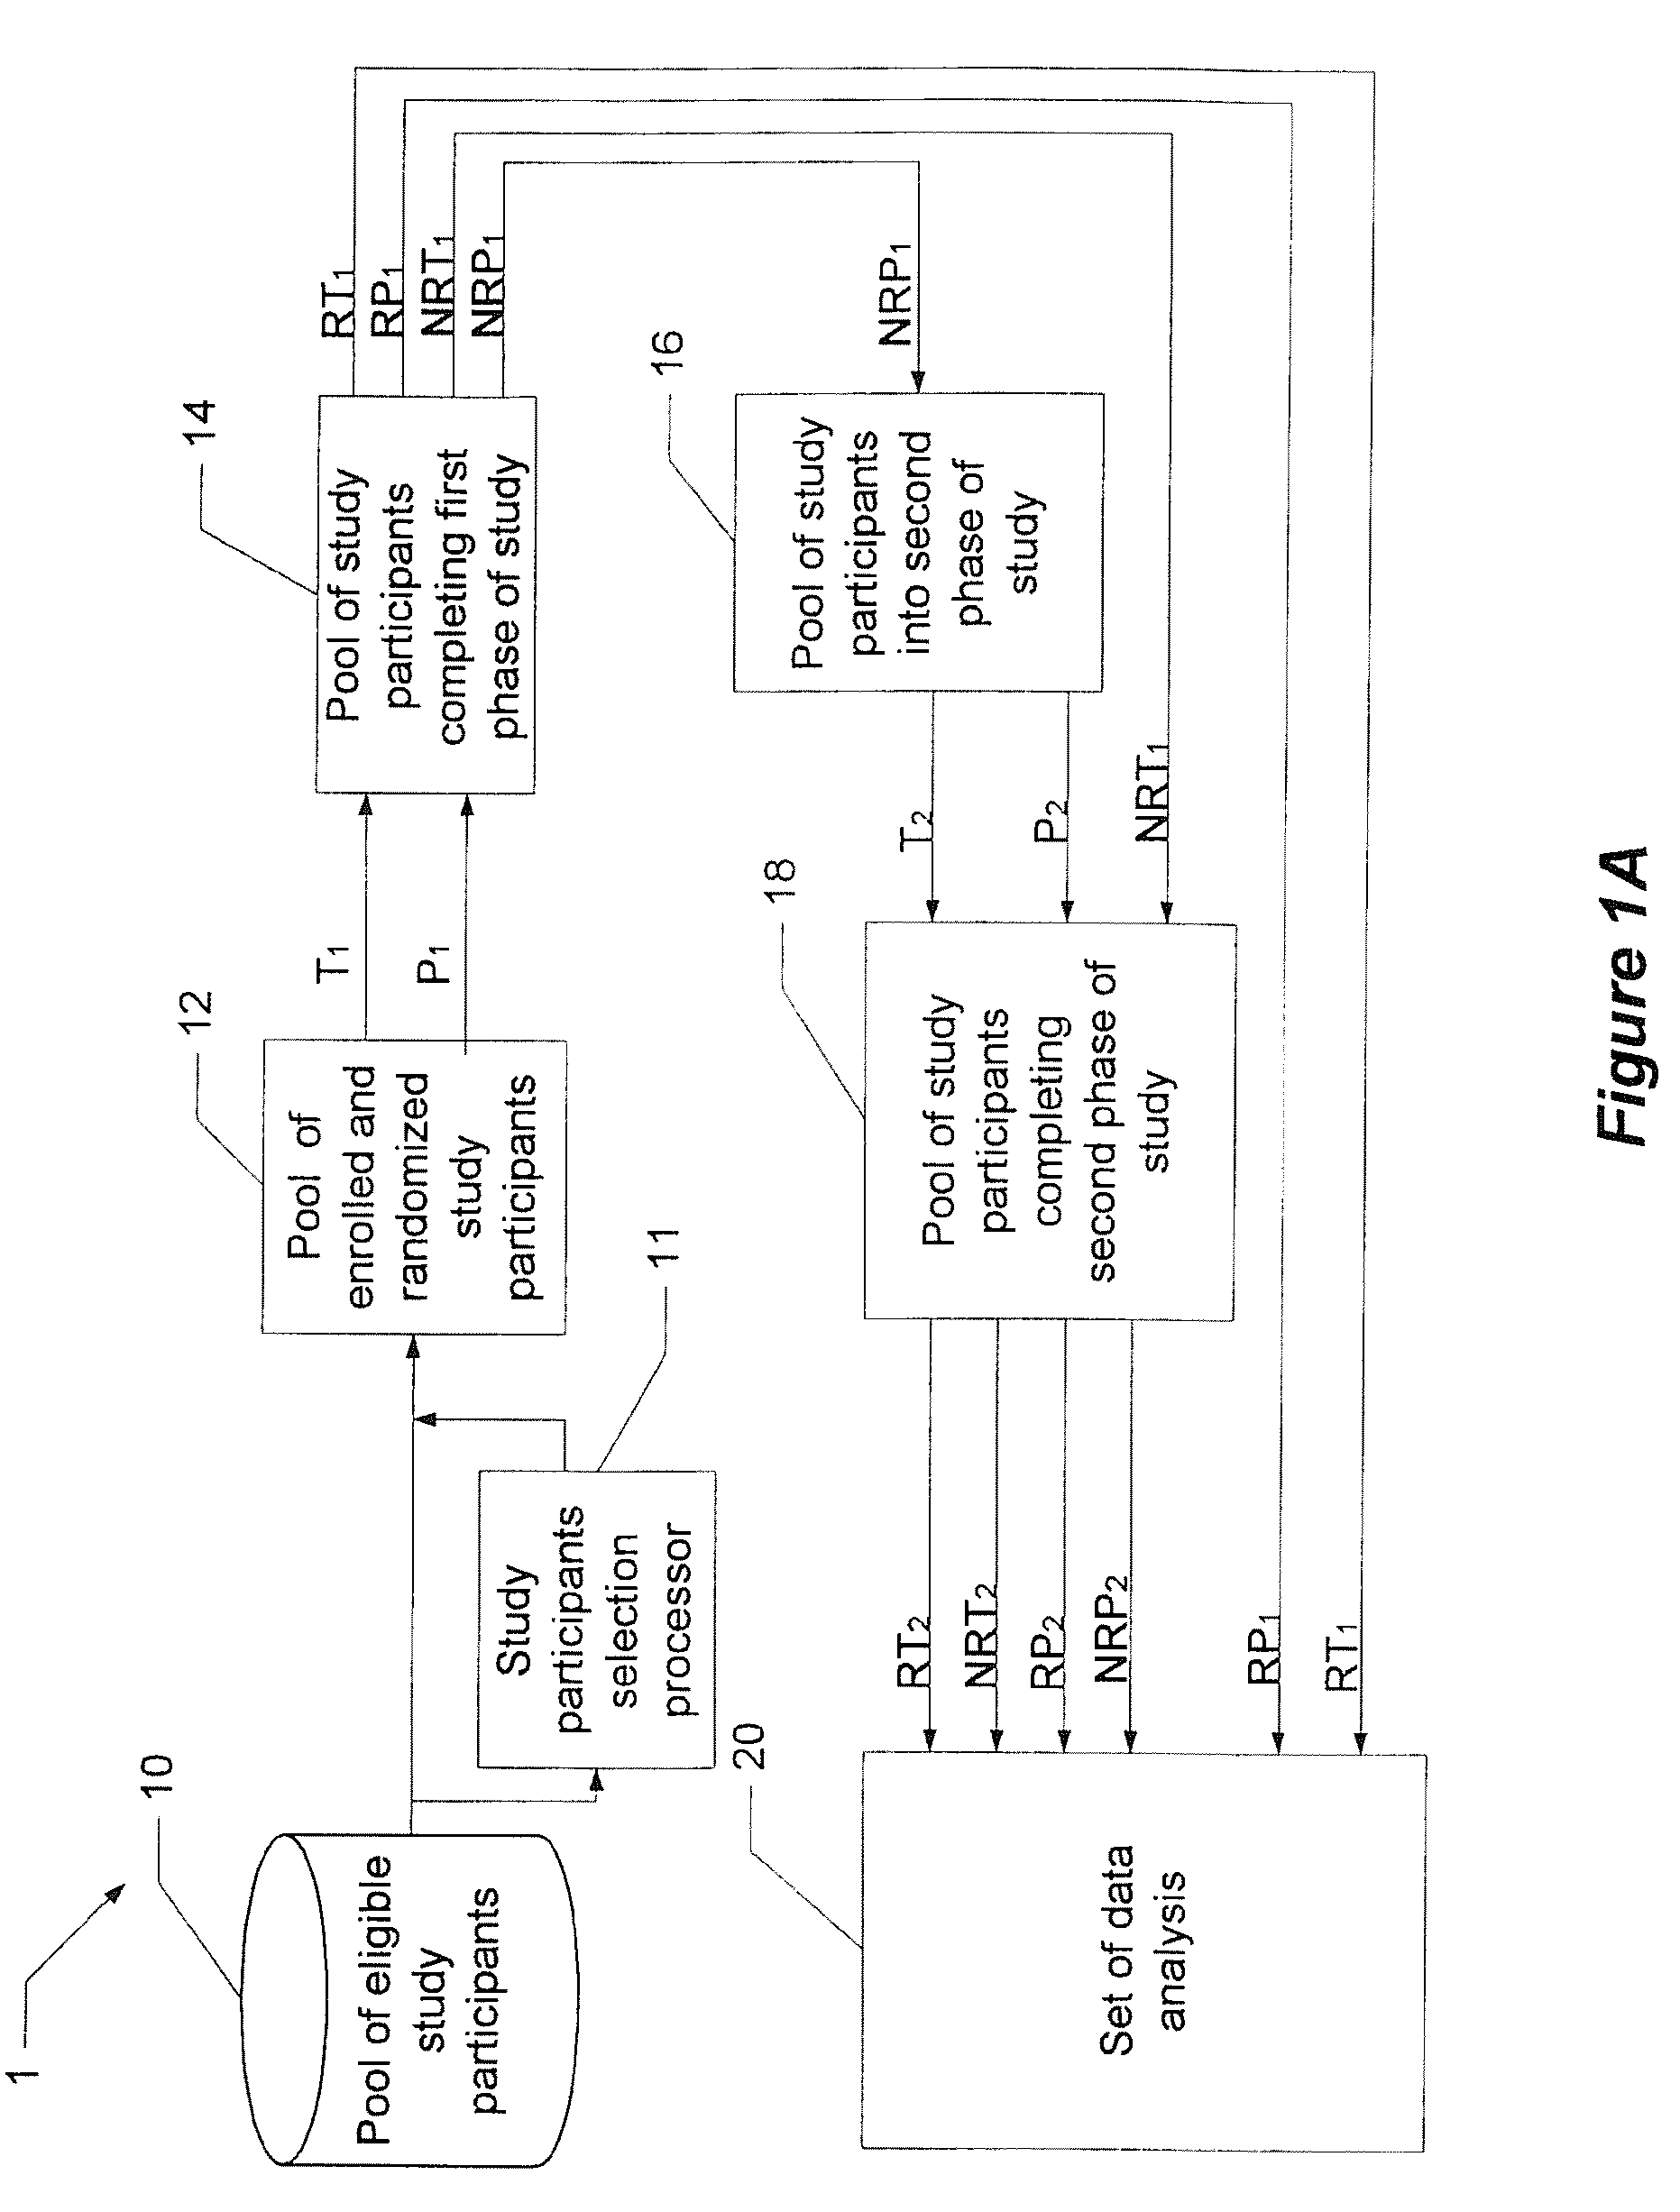 System and method for reducing the placebo effect in controlled clinical trials